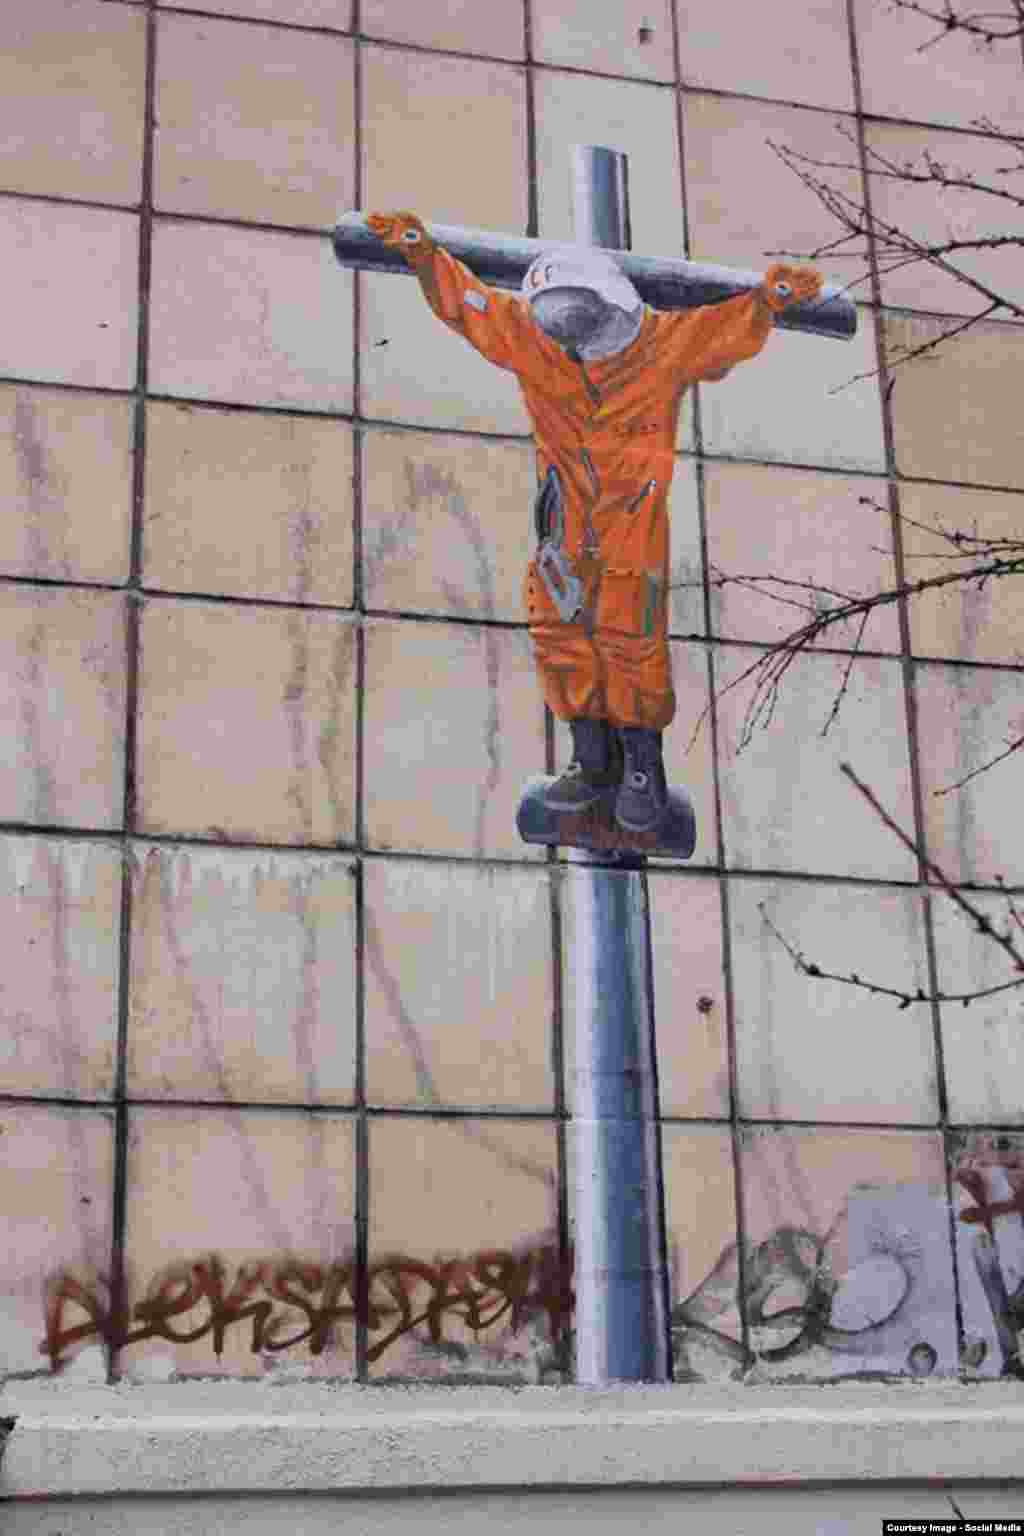 In 2015, Cosmonautics Day coincided with the Orthodox Easter. A Perm-based artist, Aleksandr Zhunev, depicted Gagarin crucified to mark the coincidence. He explained this gesture by saying that science and religion had been in opposition to each other, but now science had started to lose out in public opinion.&nbsp;